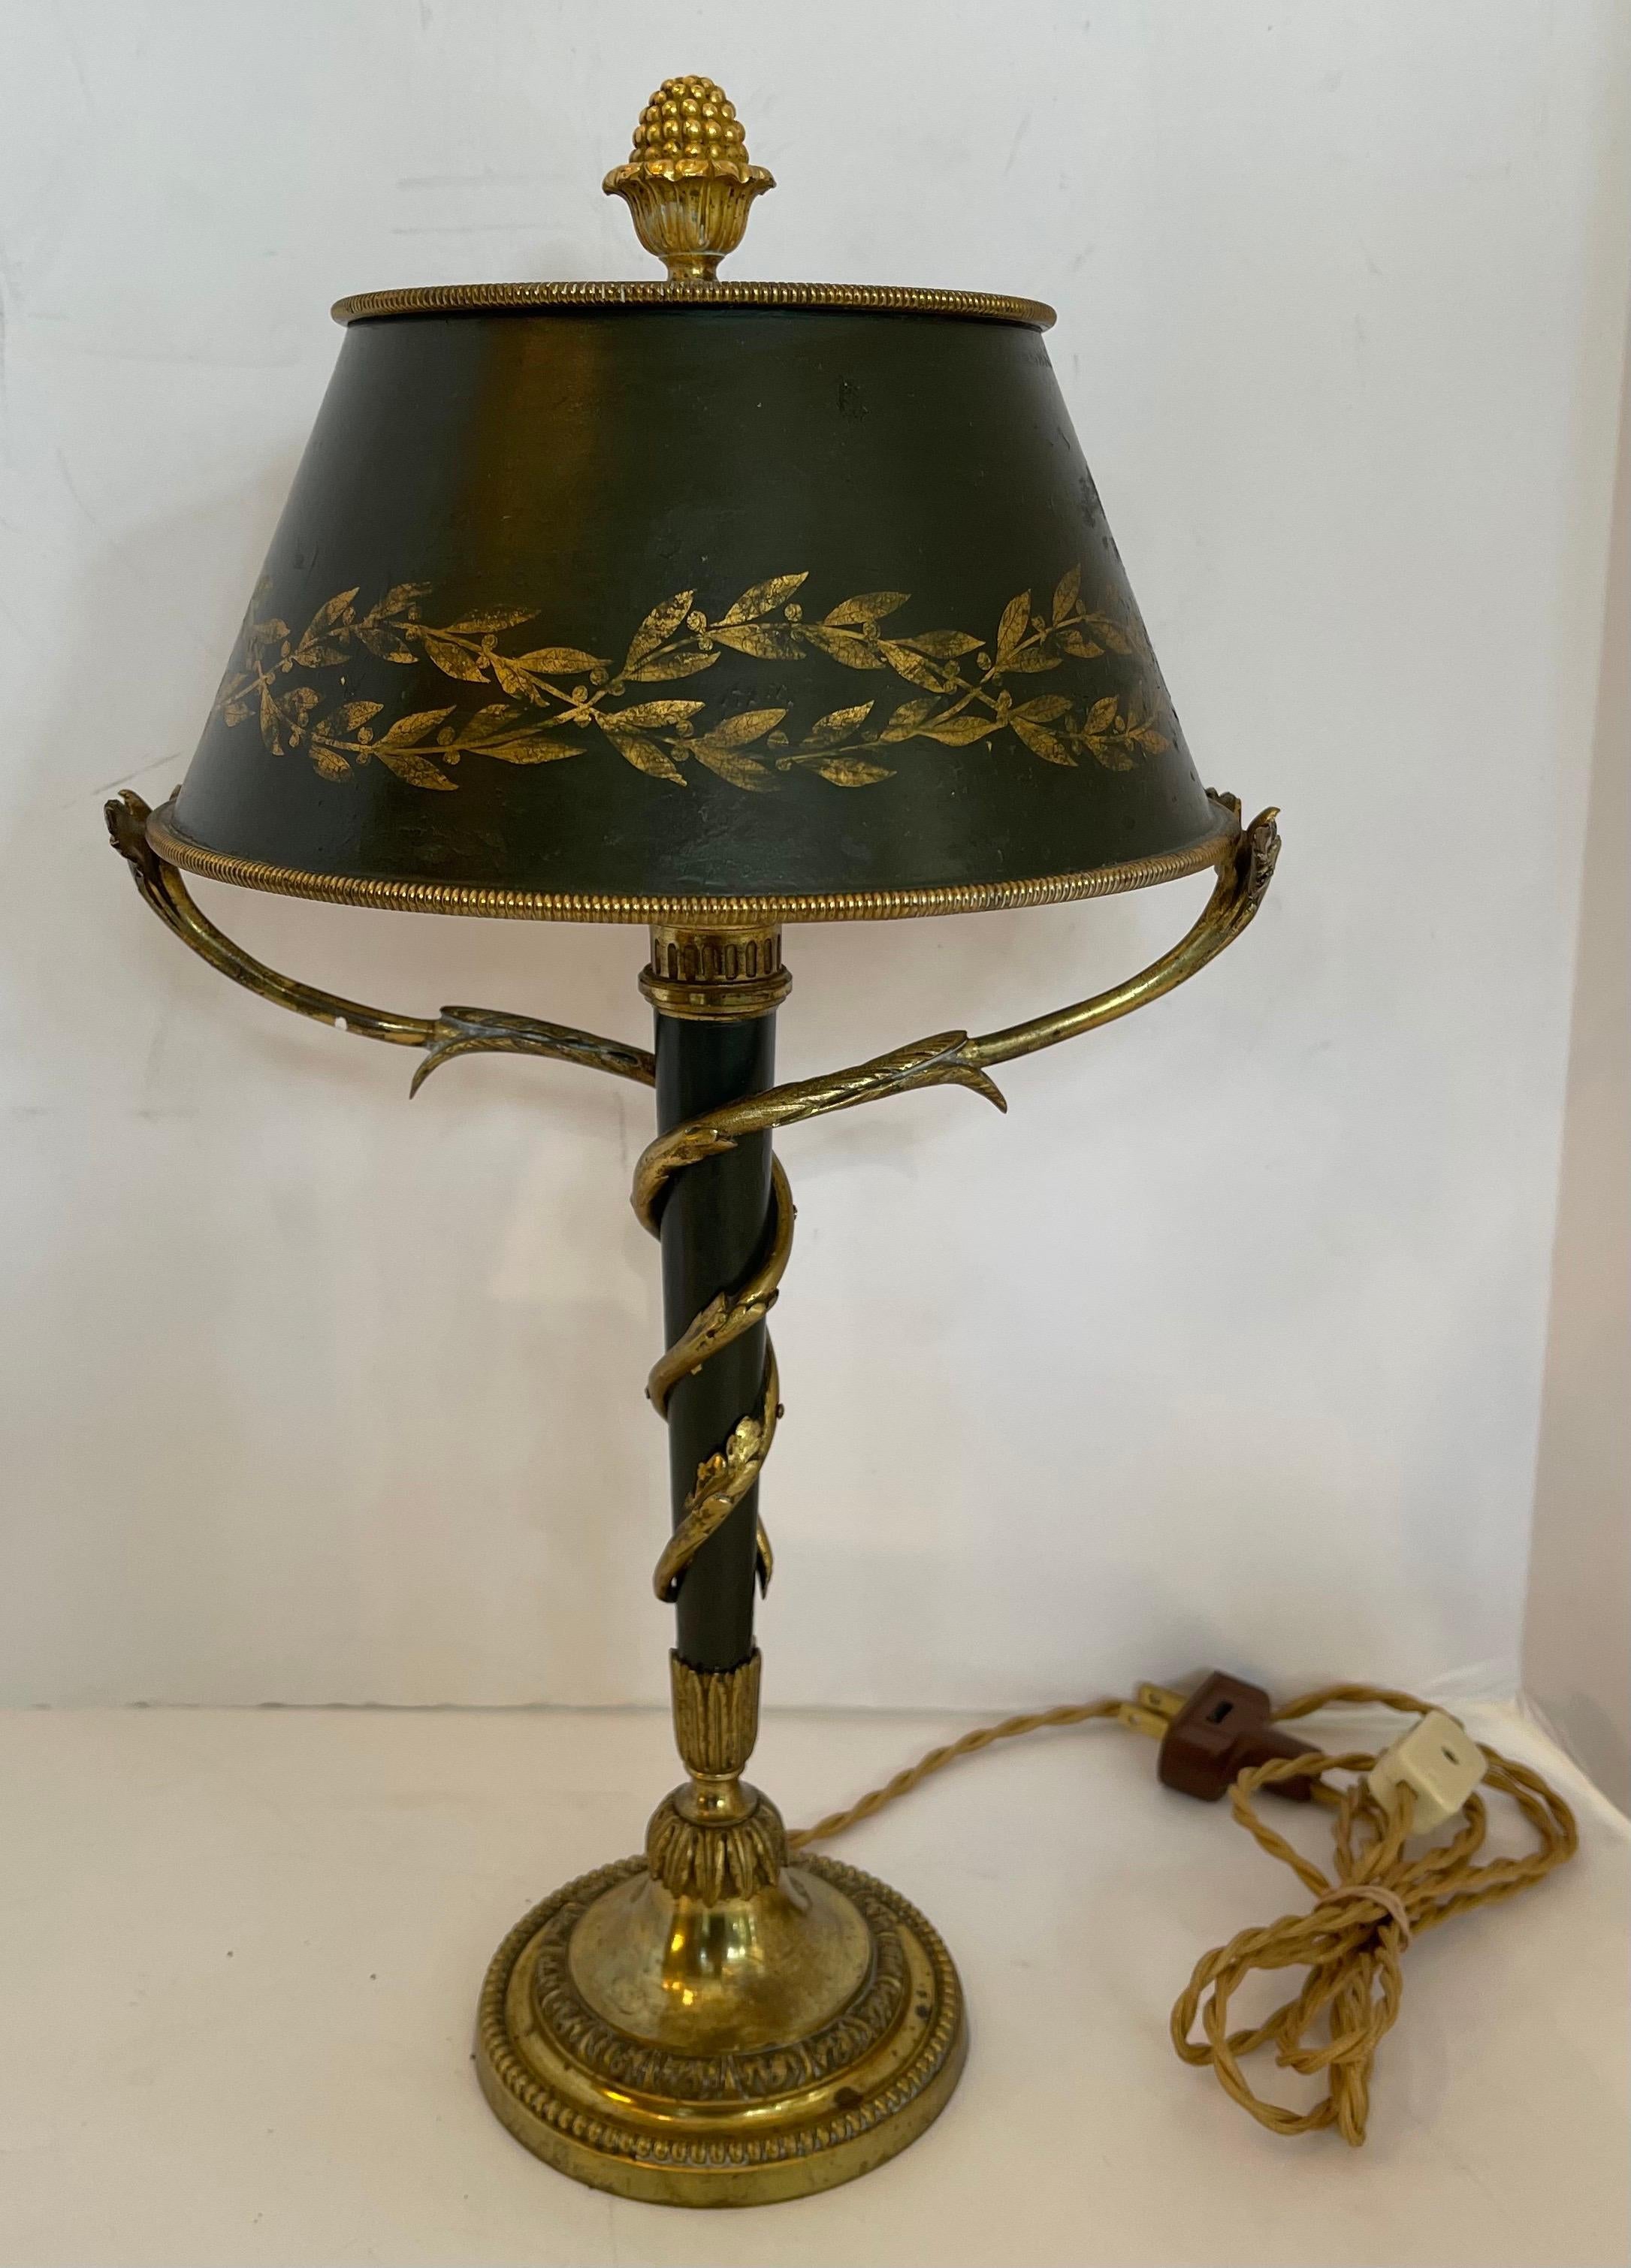 Wonderful pair of French signed Henri beau gilt bronze petite Bouillotte lamps with hand painted tole shades.